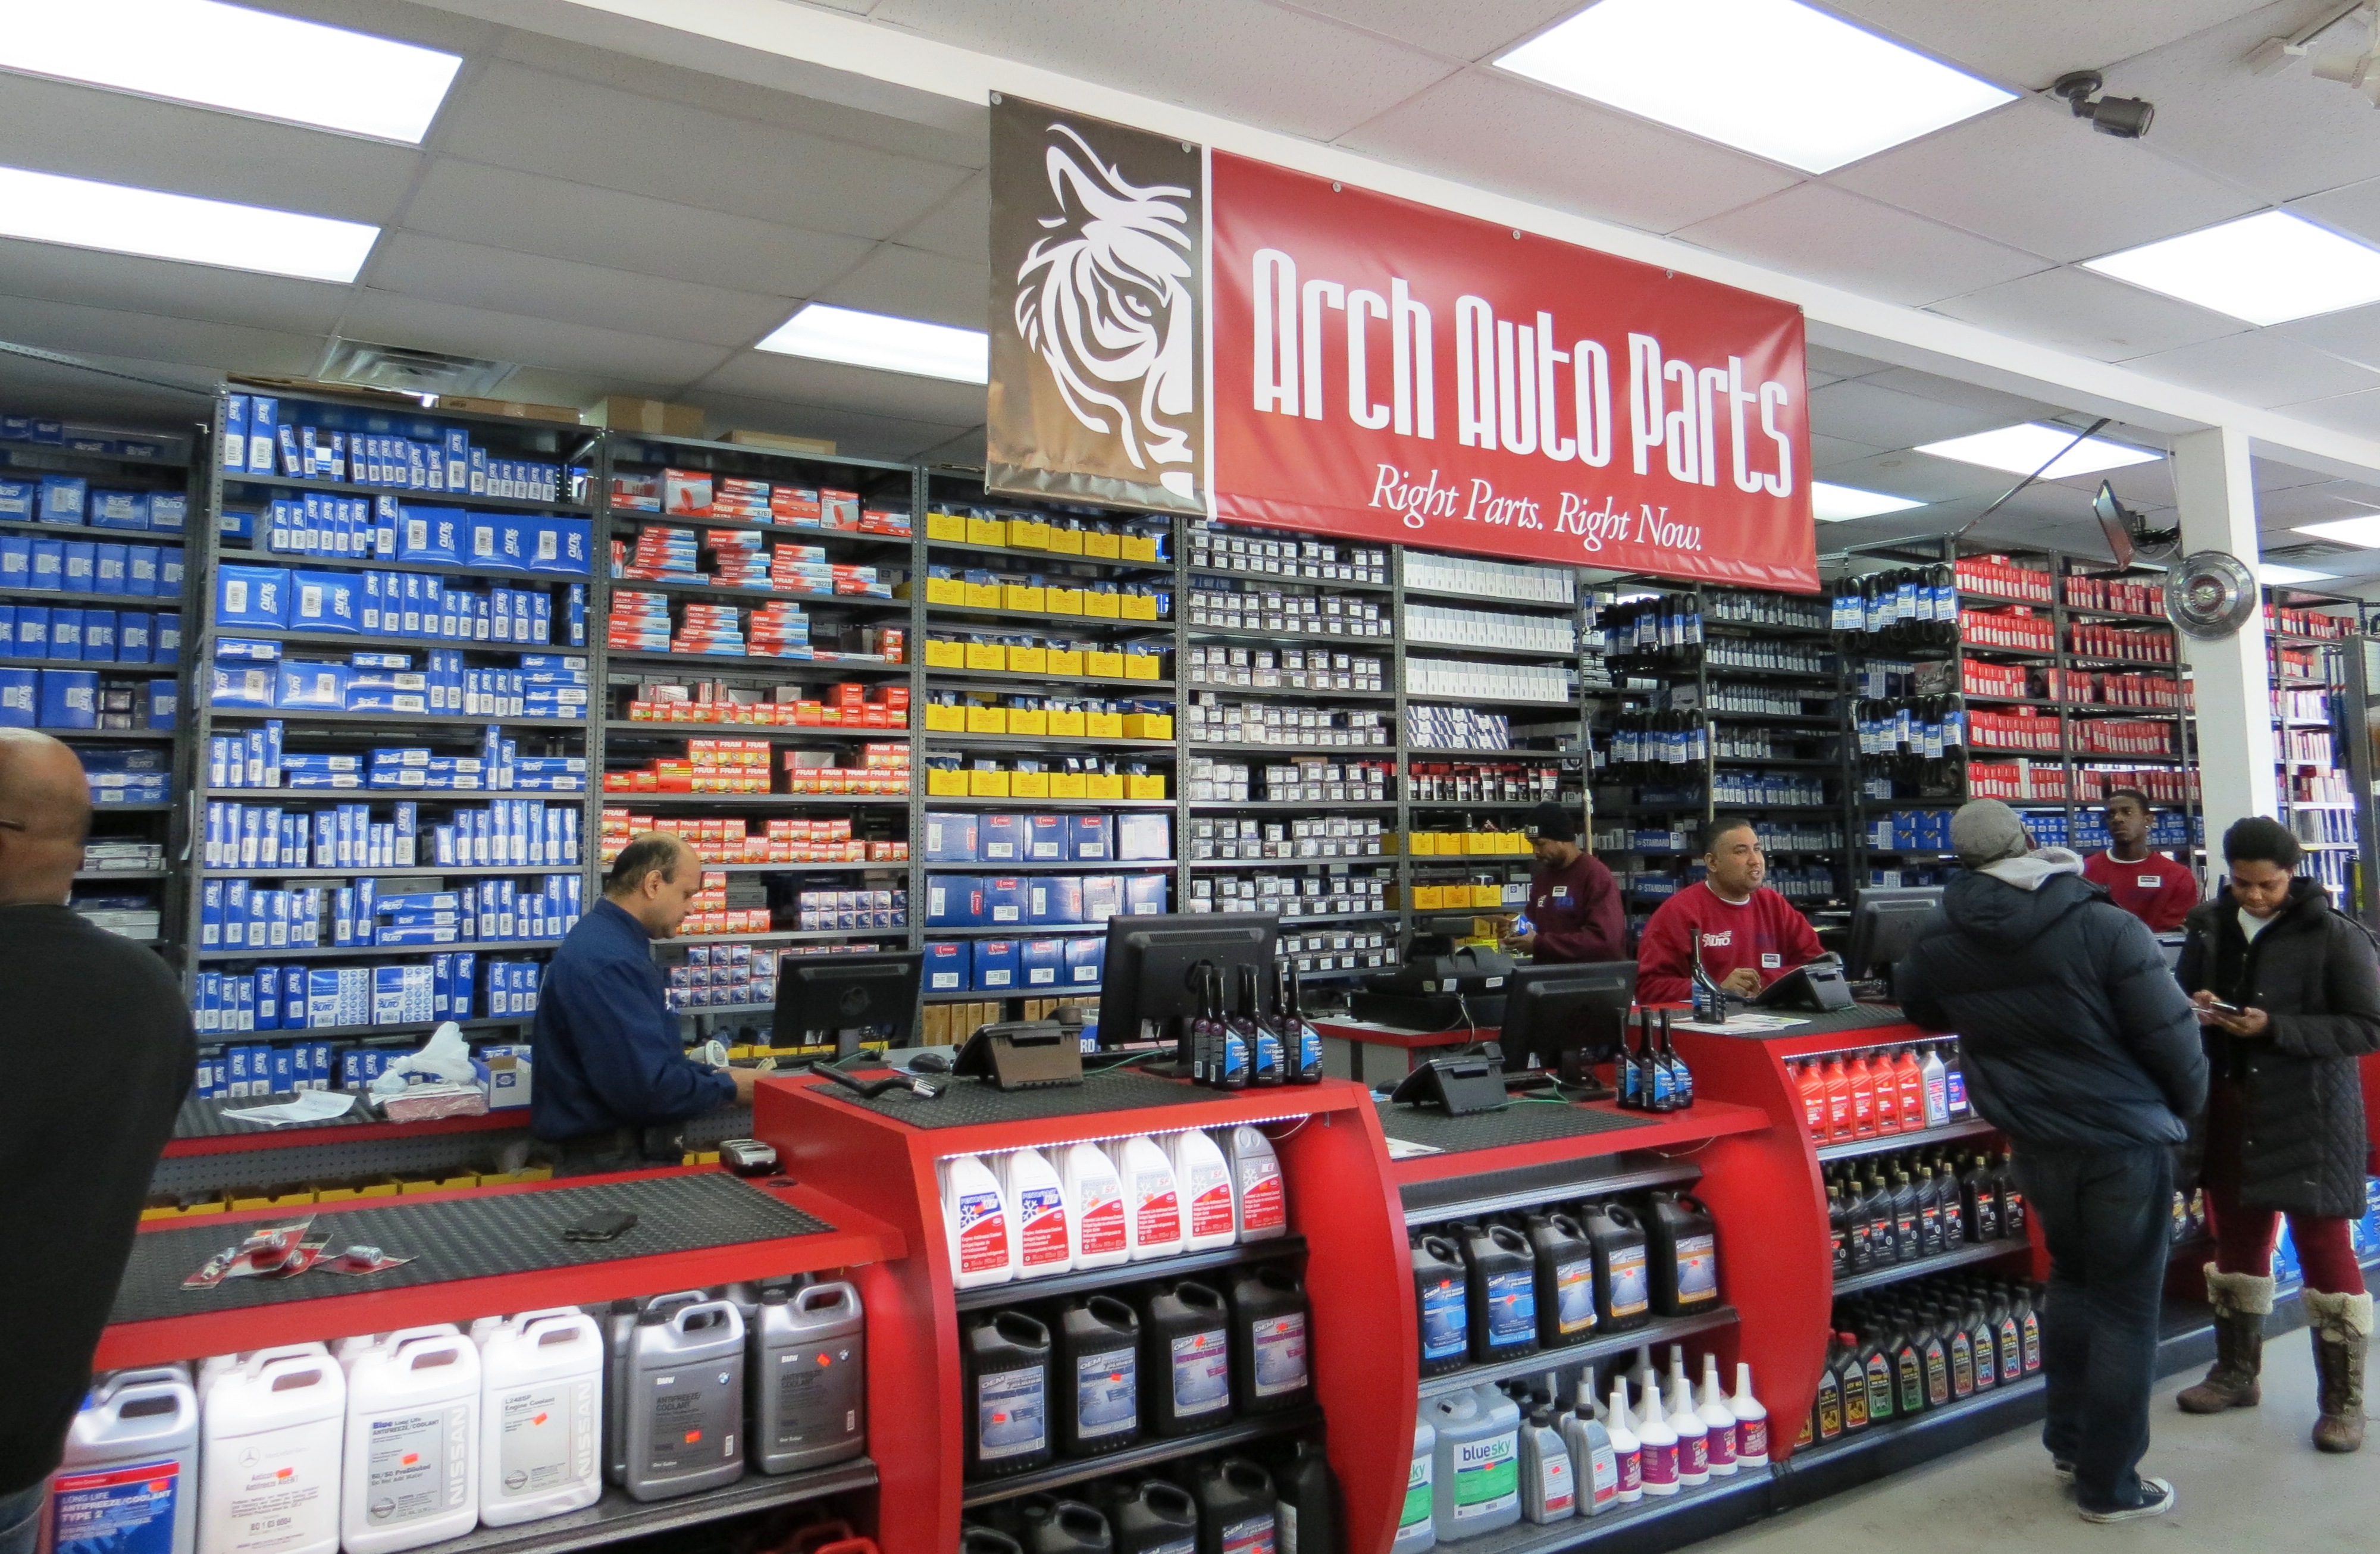 Arch Auto Parts has the best countermen in the business to help you get the "Right parts. Right now."